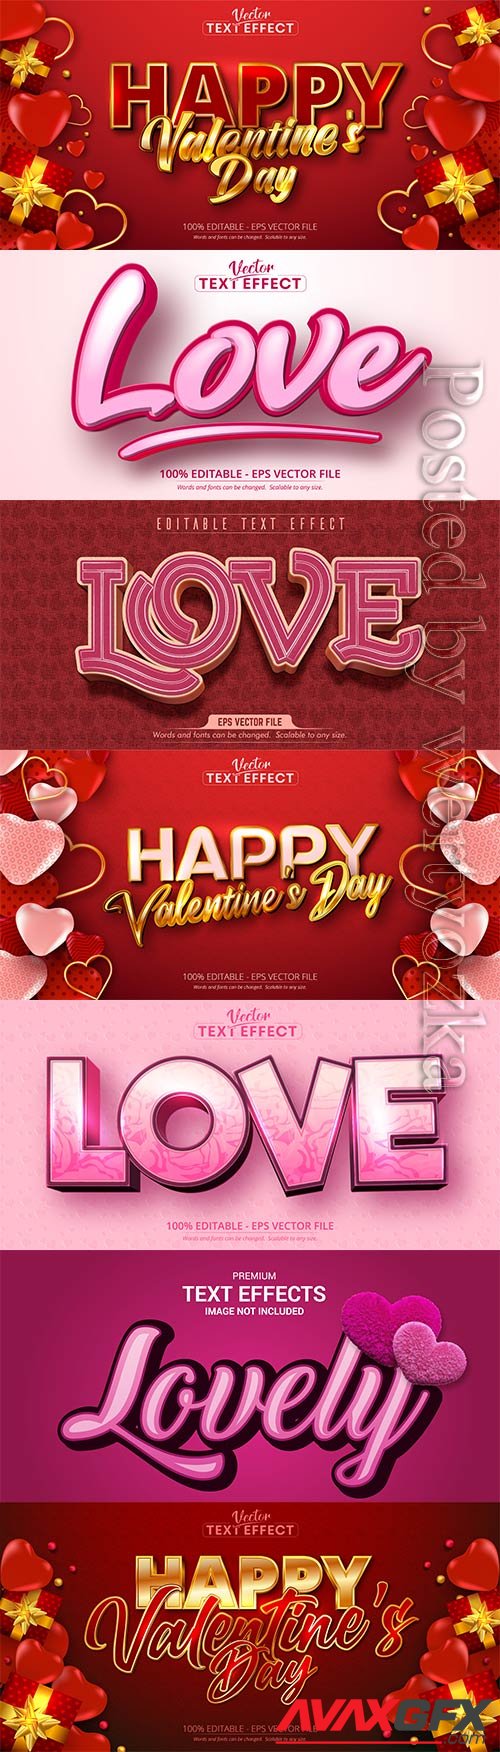 Valentine text effects style in vector with hearts